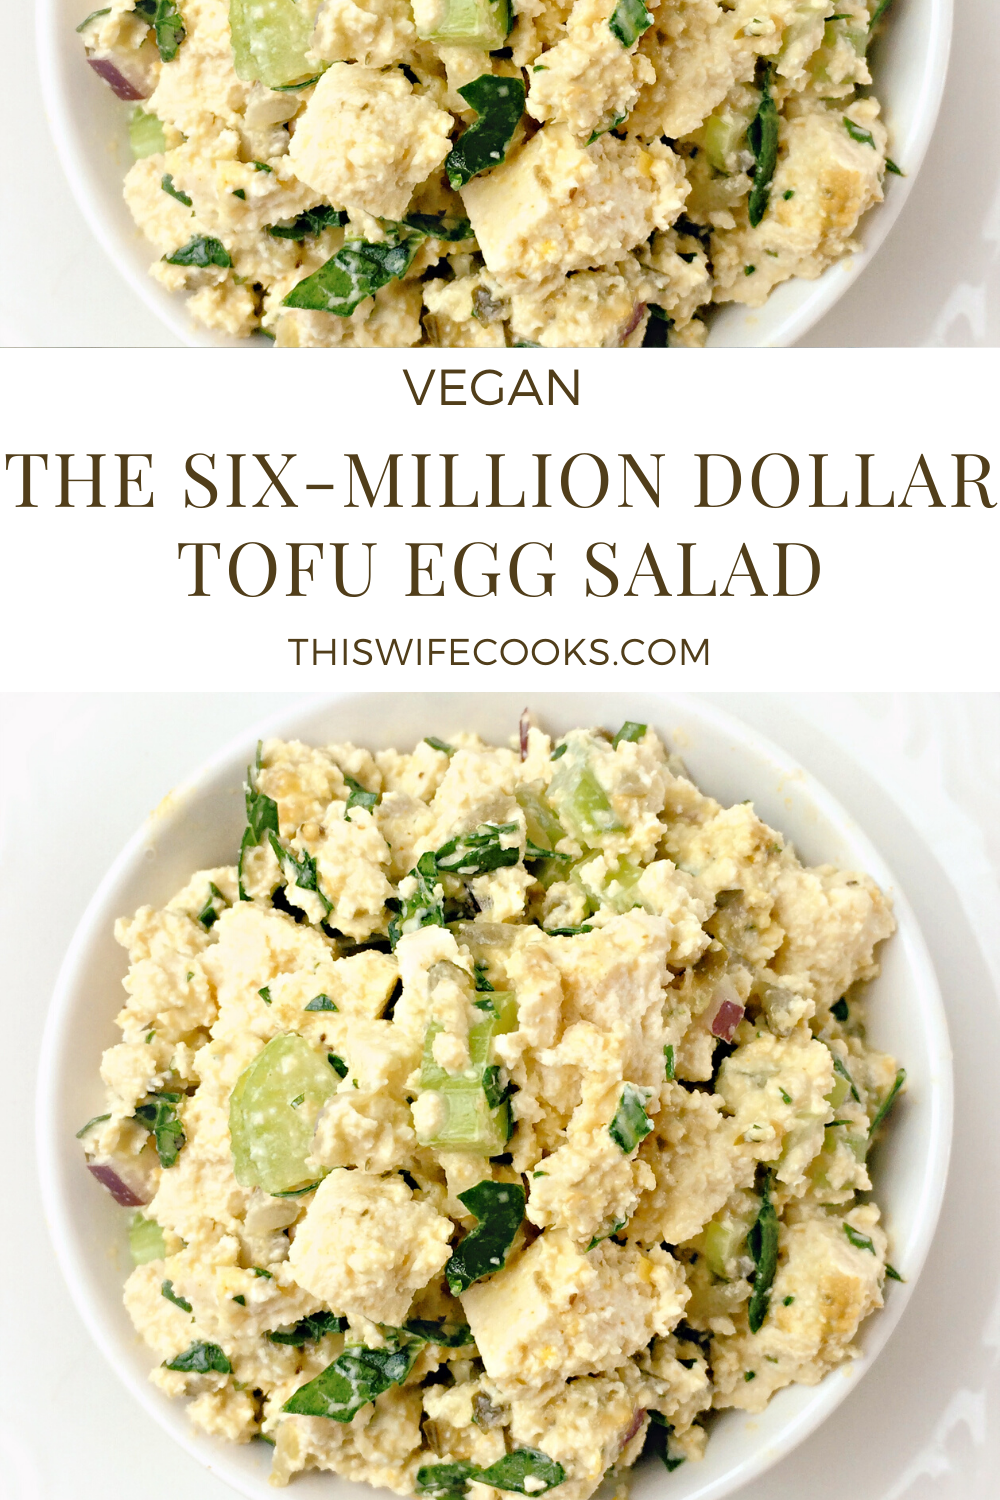 The Six-Million Dollar Tofu Egg Salad! - This is the preparation method as it appears in the book Mastering the Art of Vegan Cooking | thiswifecooks.com 

#tofurecipes #veganeggsalad #thiswifecooksrecipes #healthyveganrecipes #easysandwichrecipes #makeaheadrecipes #veganeasterrecipes  via @thiswifecooks